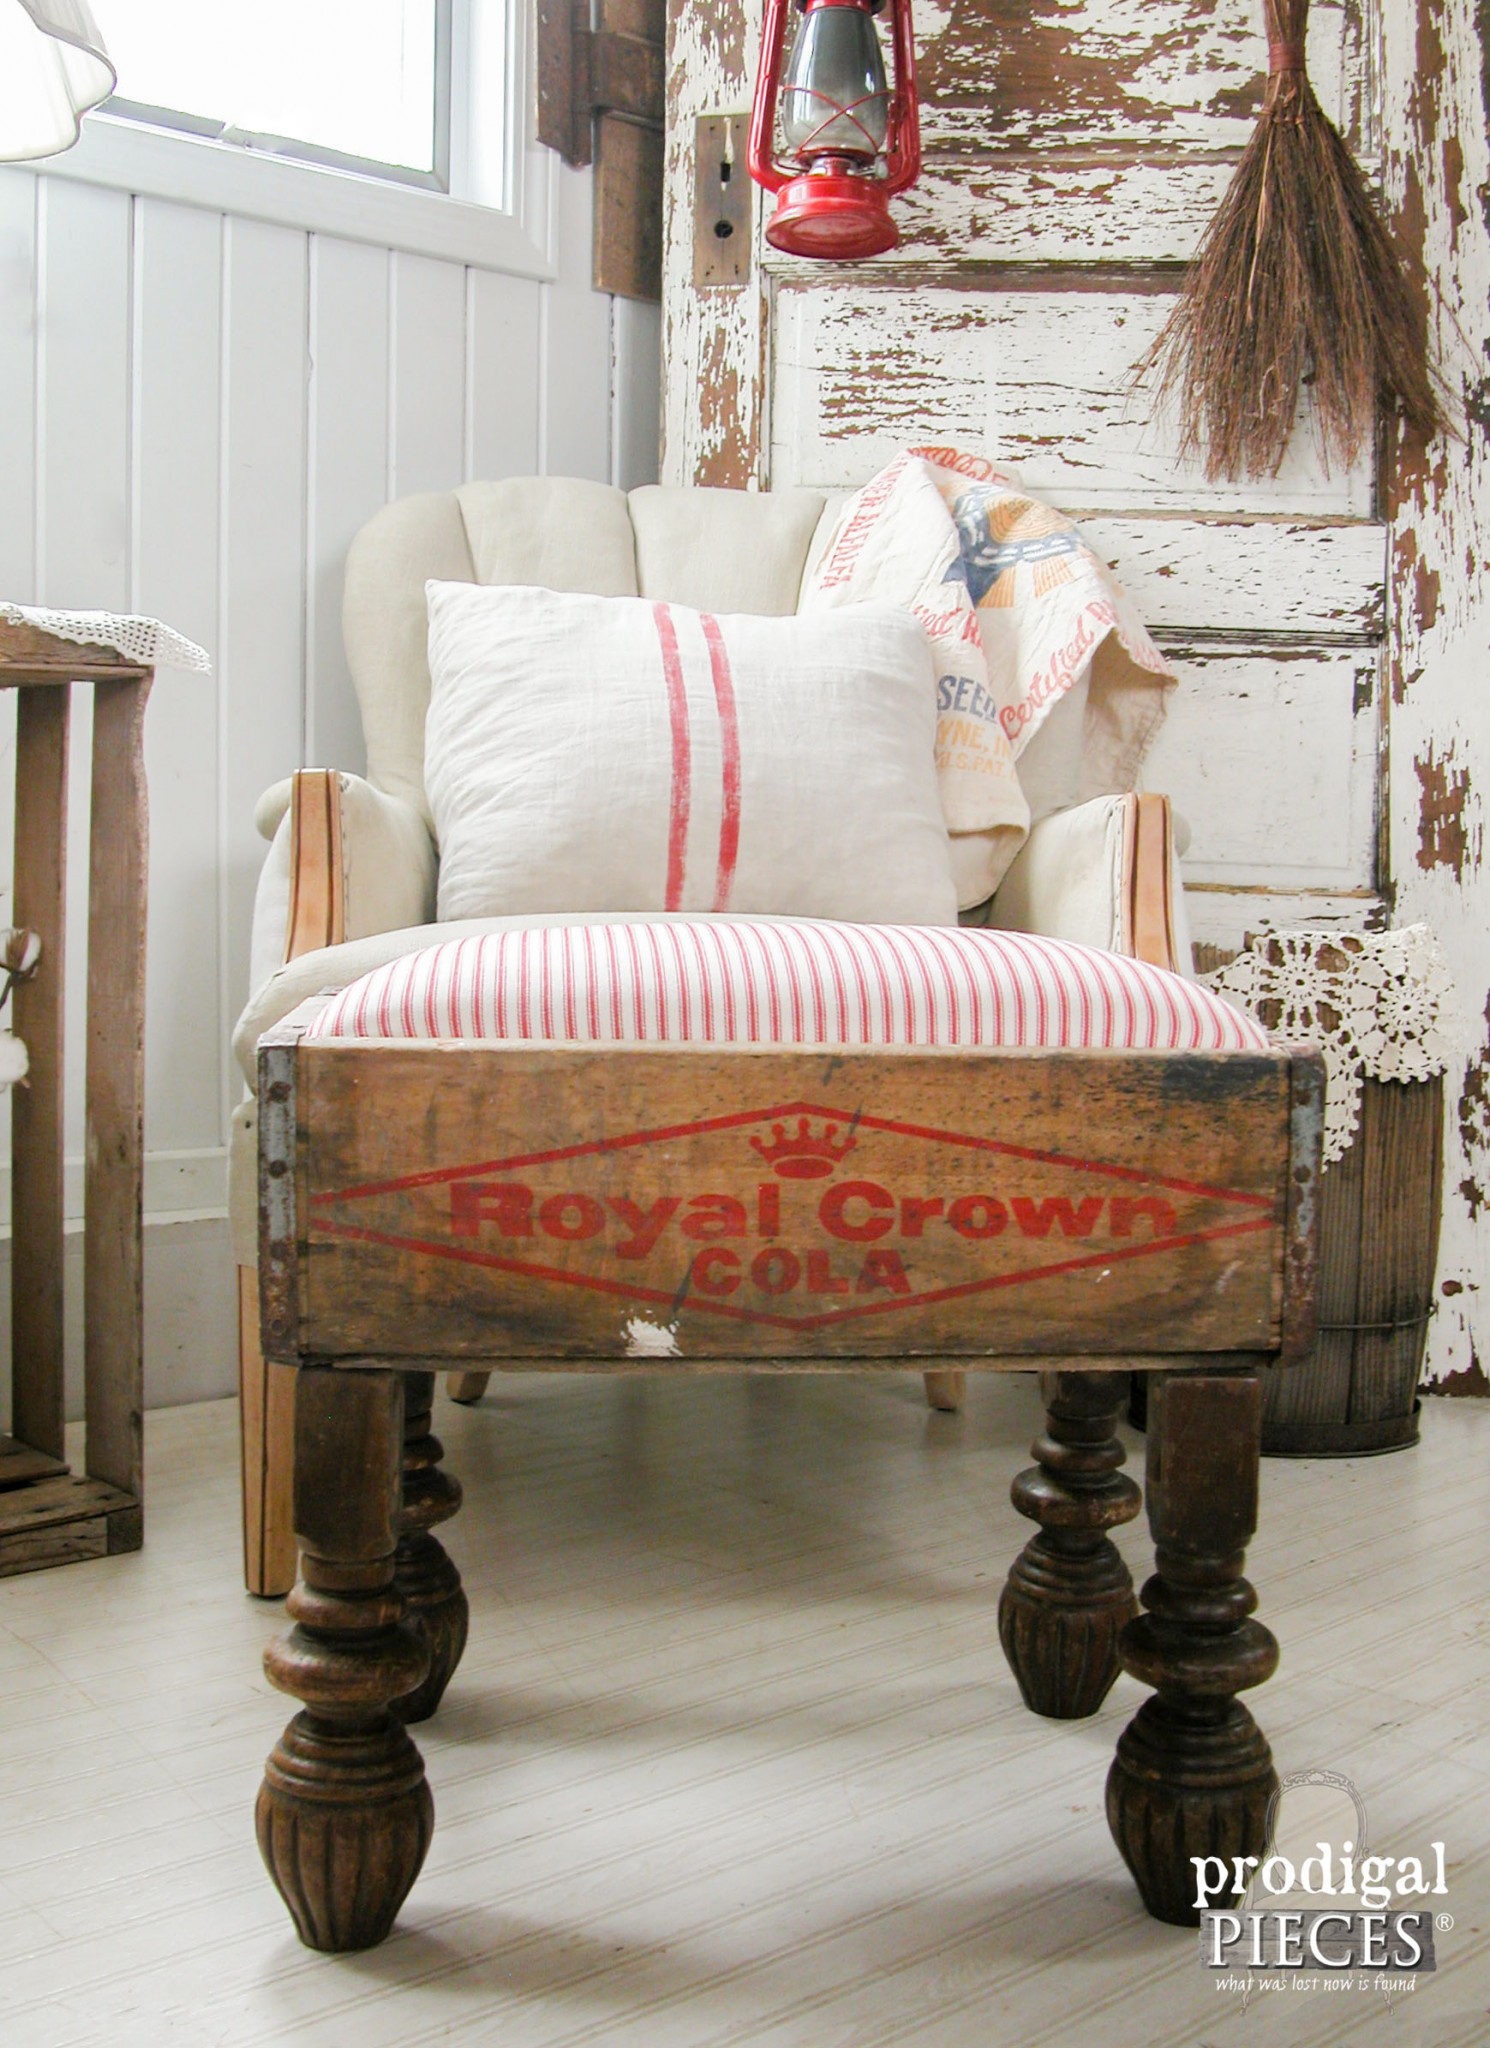 Vintage Soda Crate Turned Foot Stool, Wooden Bottle Crate Footstool